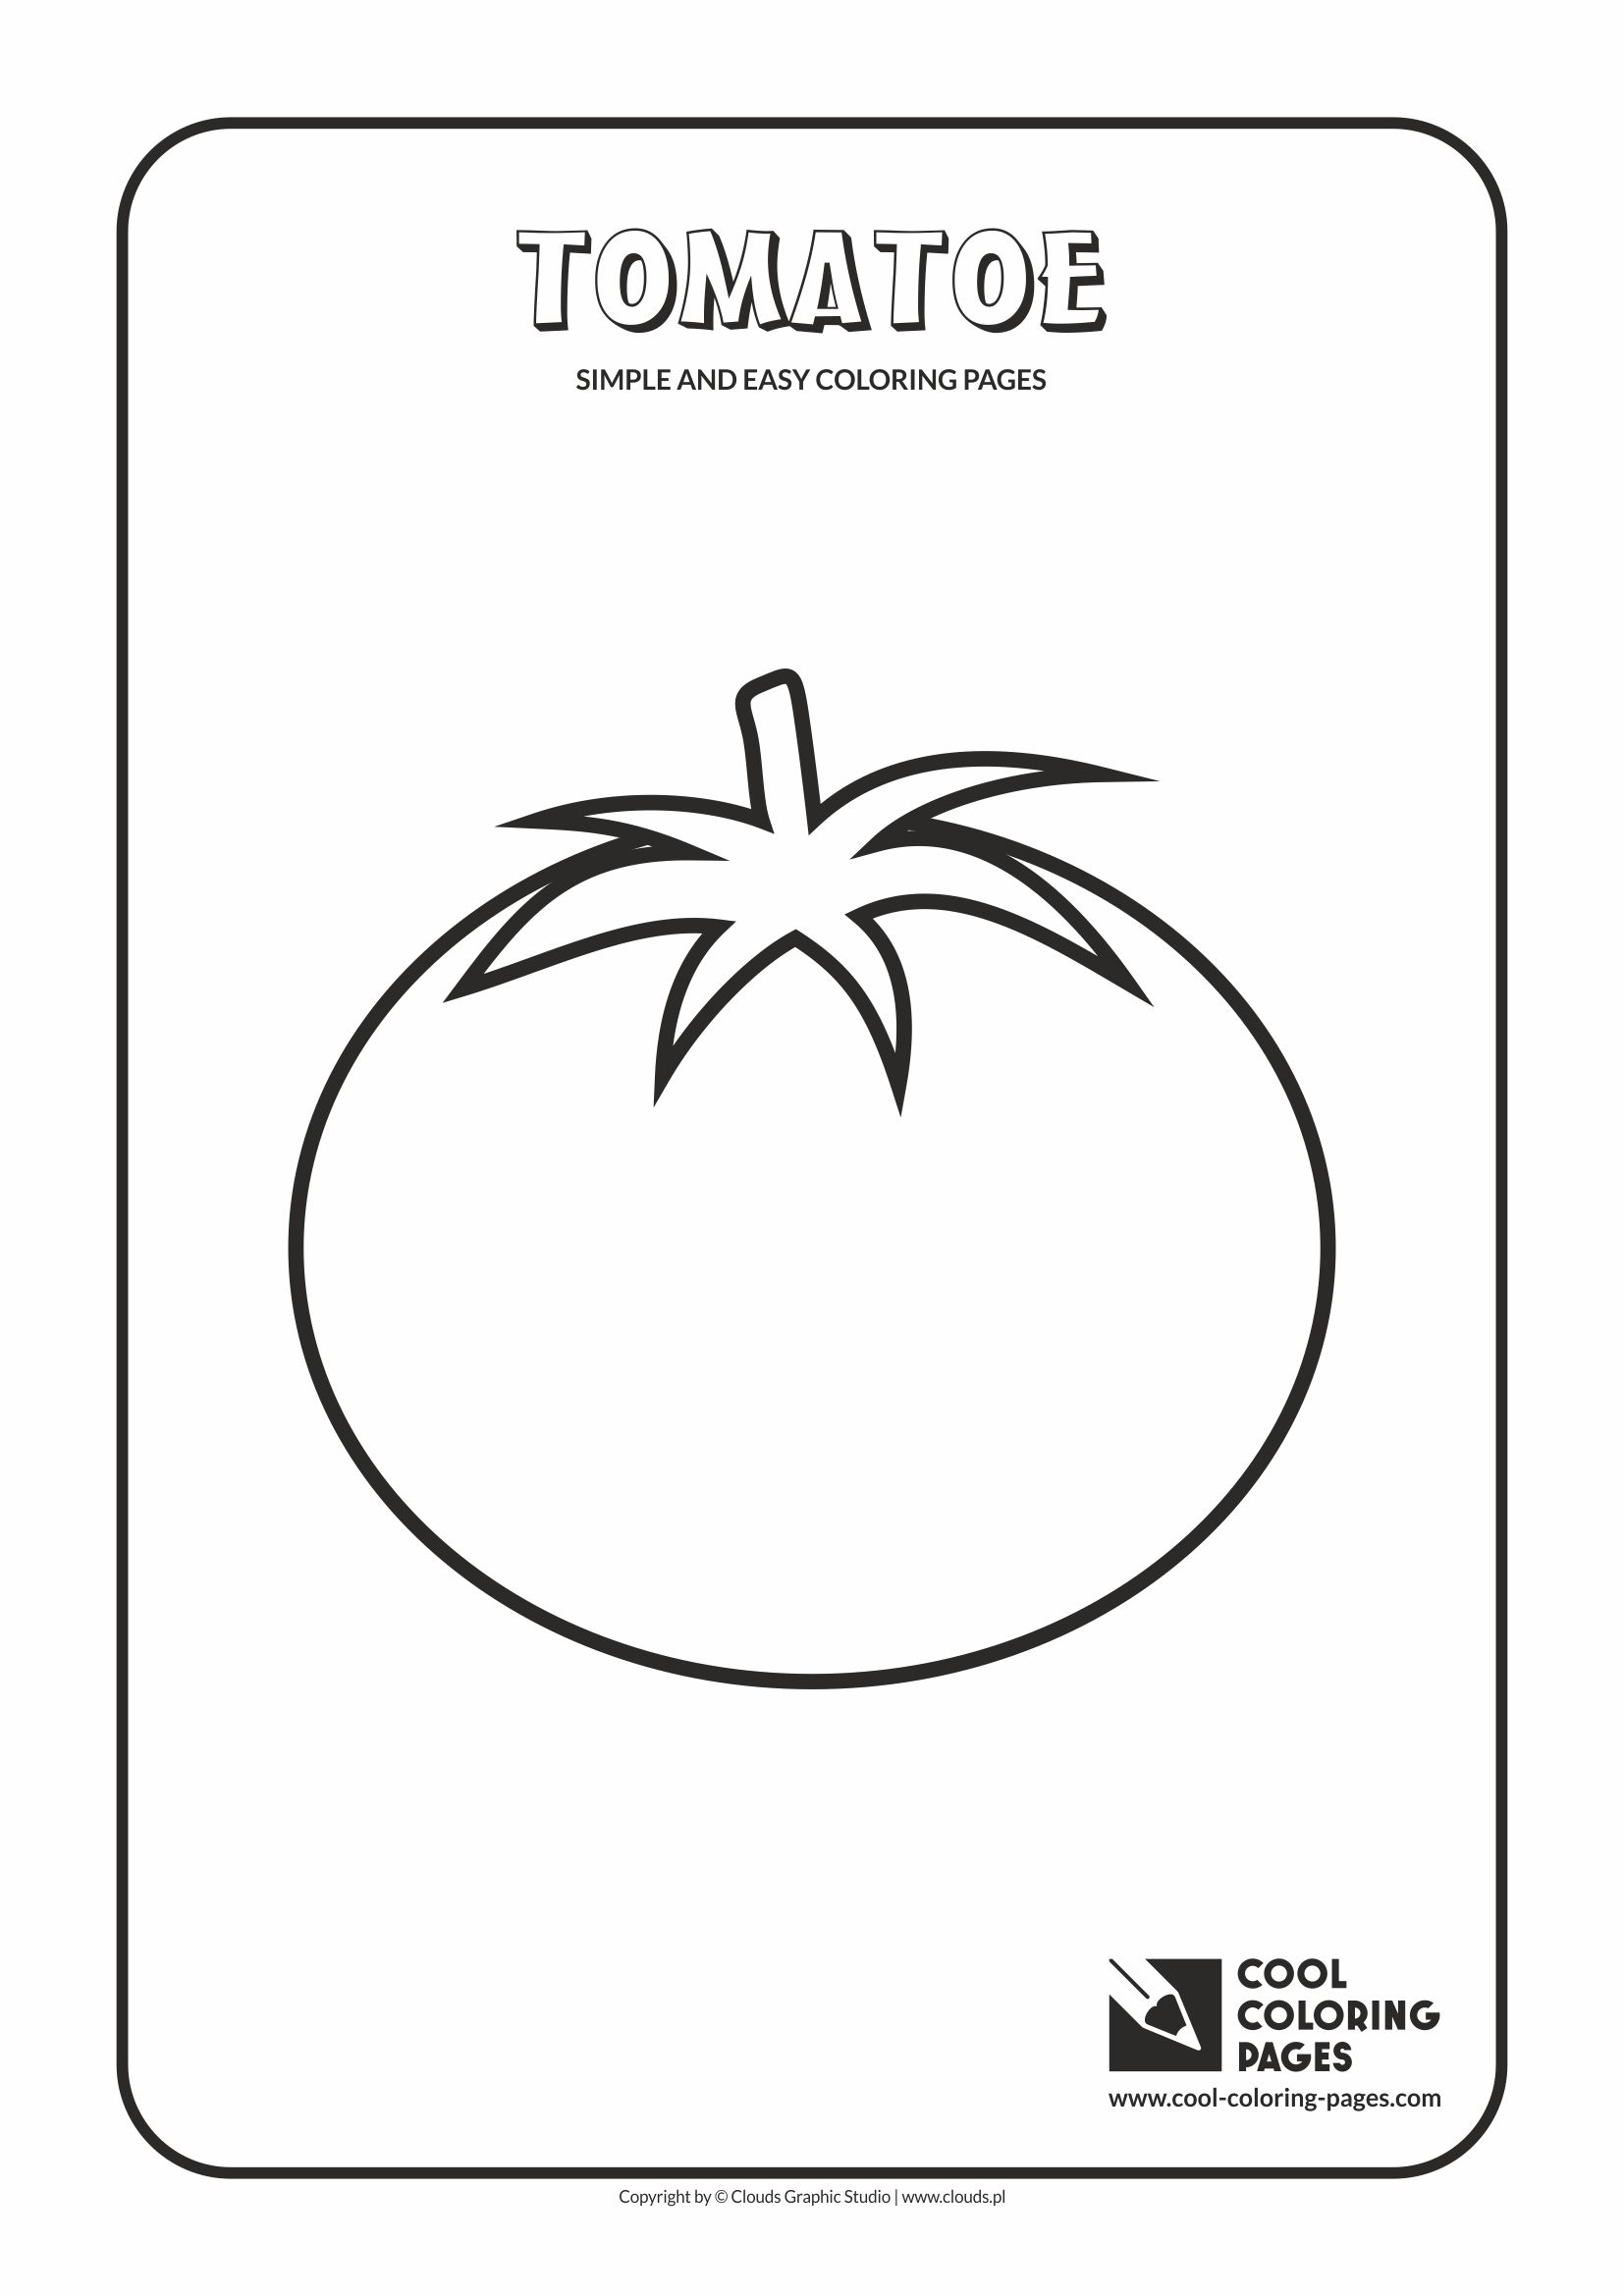 Simple and easy coloring pages for toddlers - Tomatoe